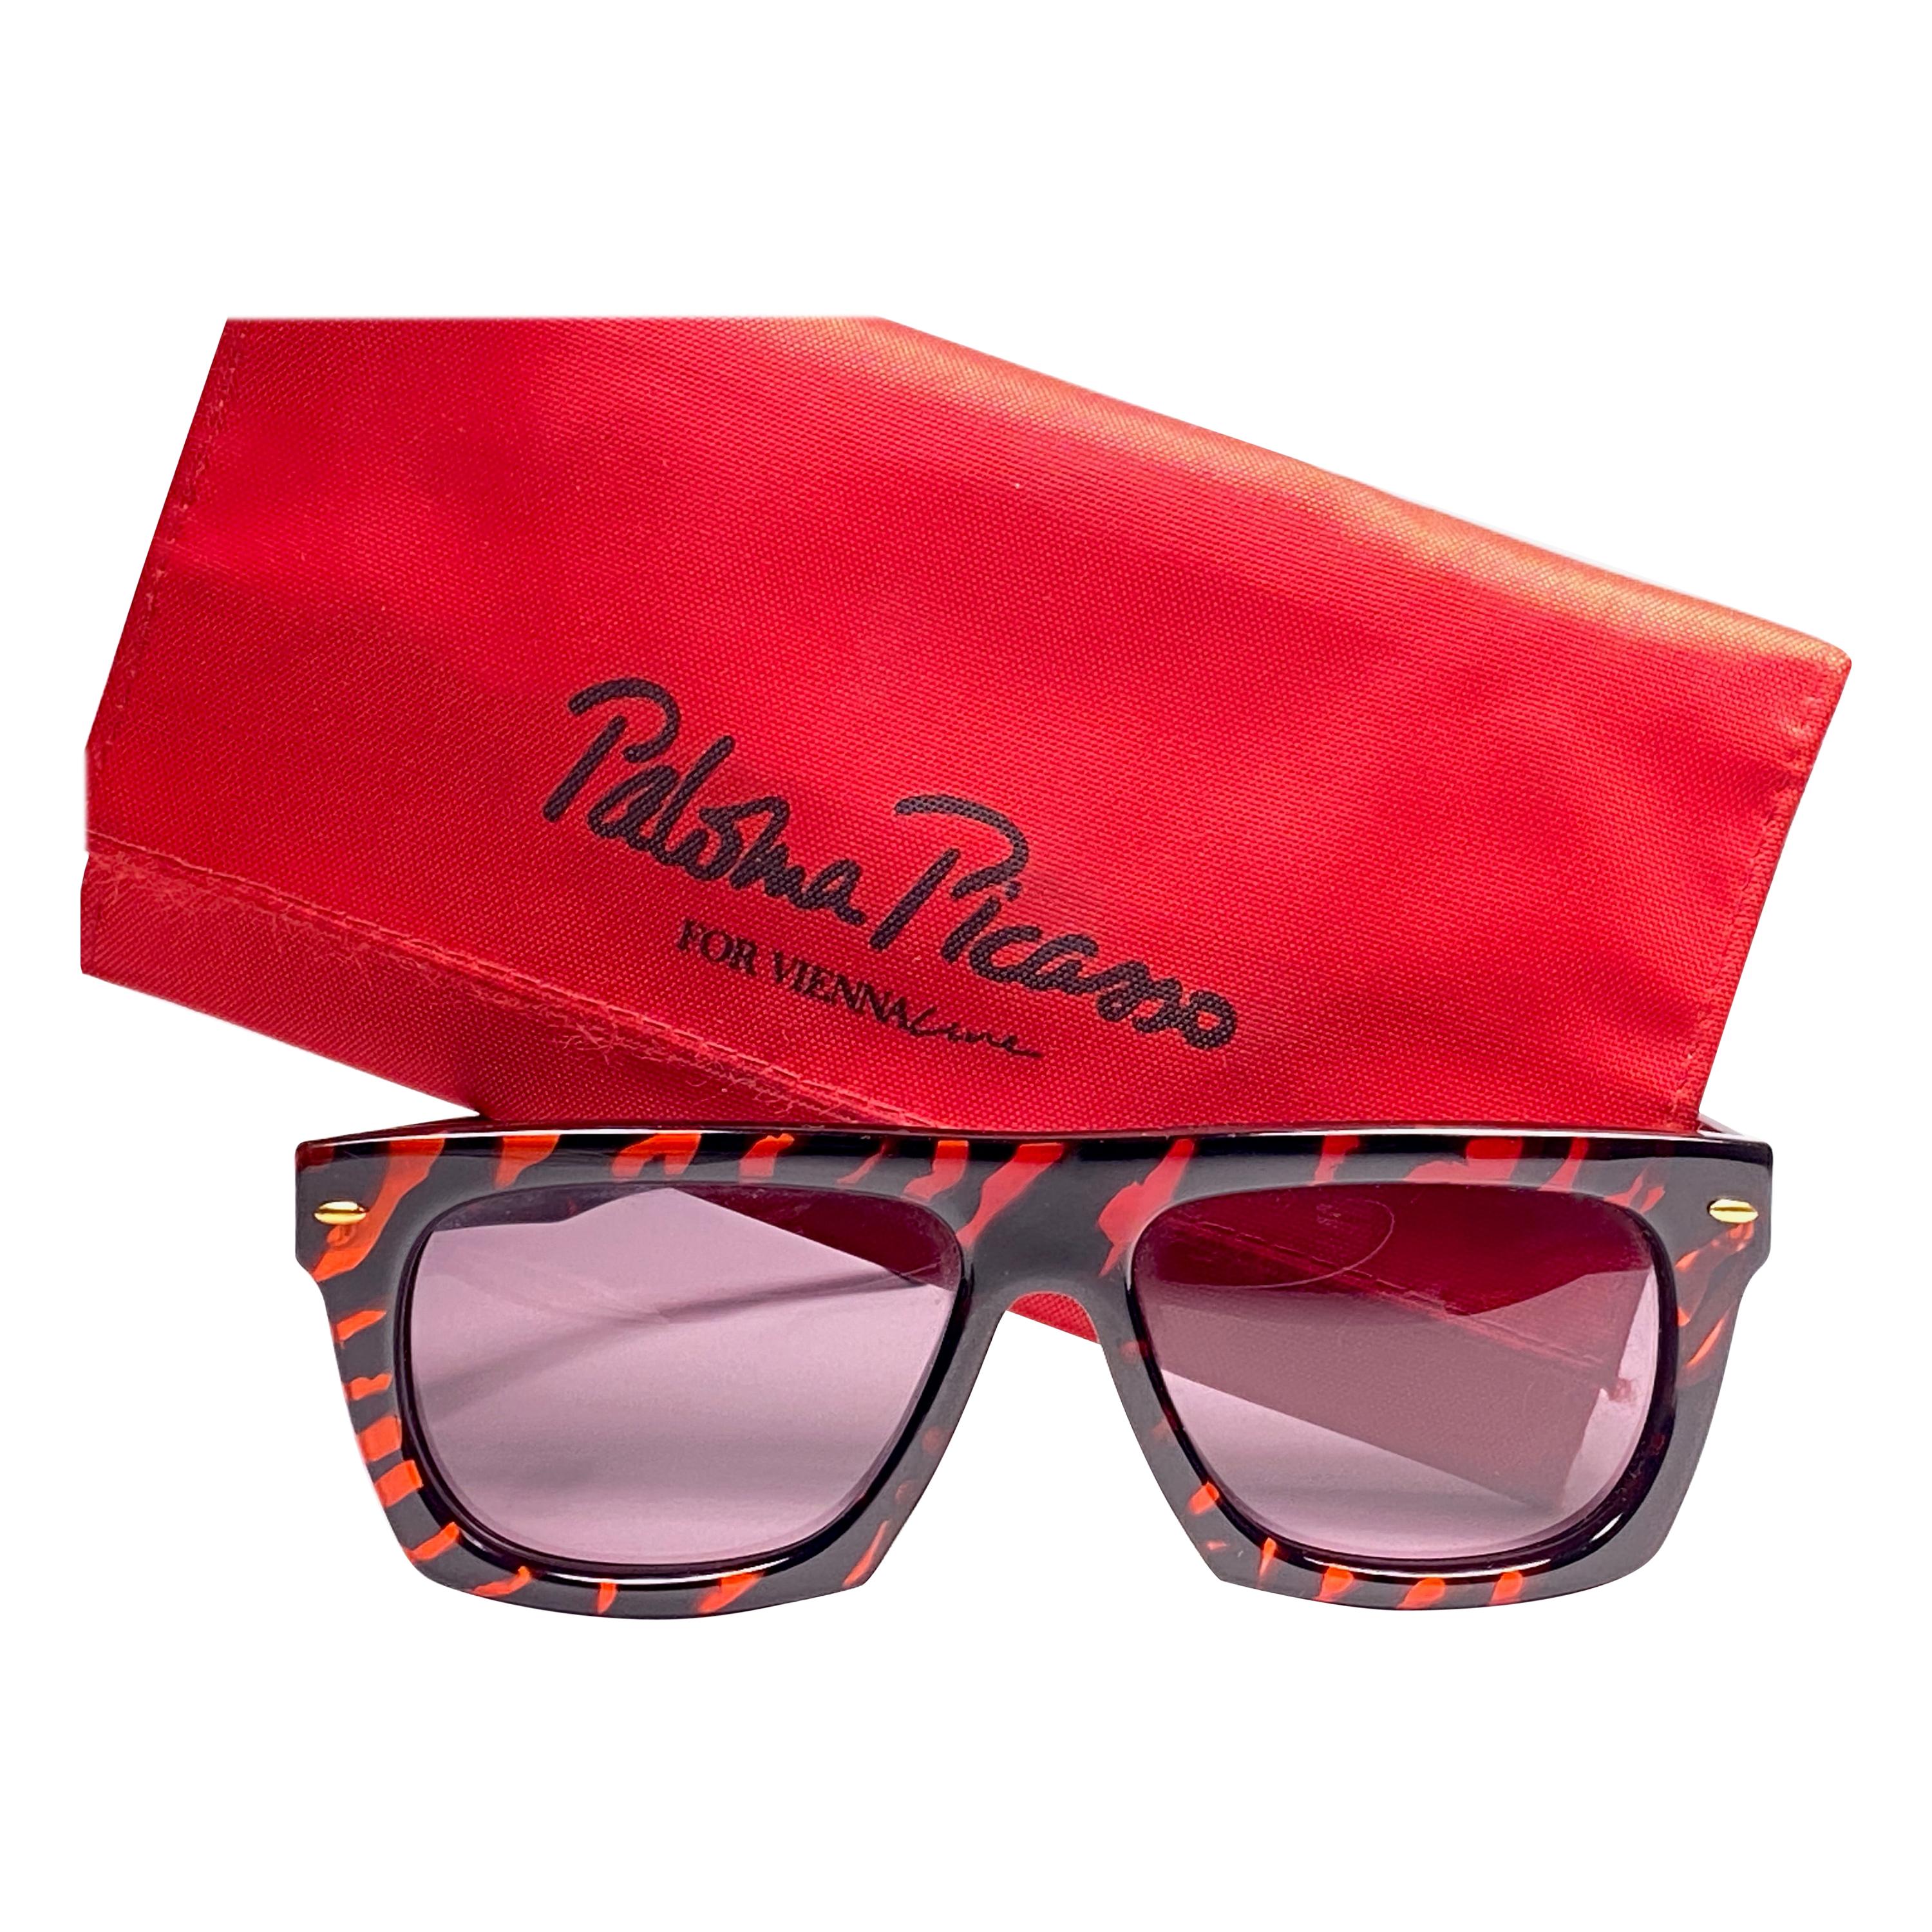 New Paloma Picasso For Viennaline 1460 Sunglasses Made in Germany 1980's at  1stDibs | paloma picasso glasses, paloma picasso sunglasses, paloma picasso  sunglasses price